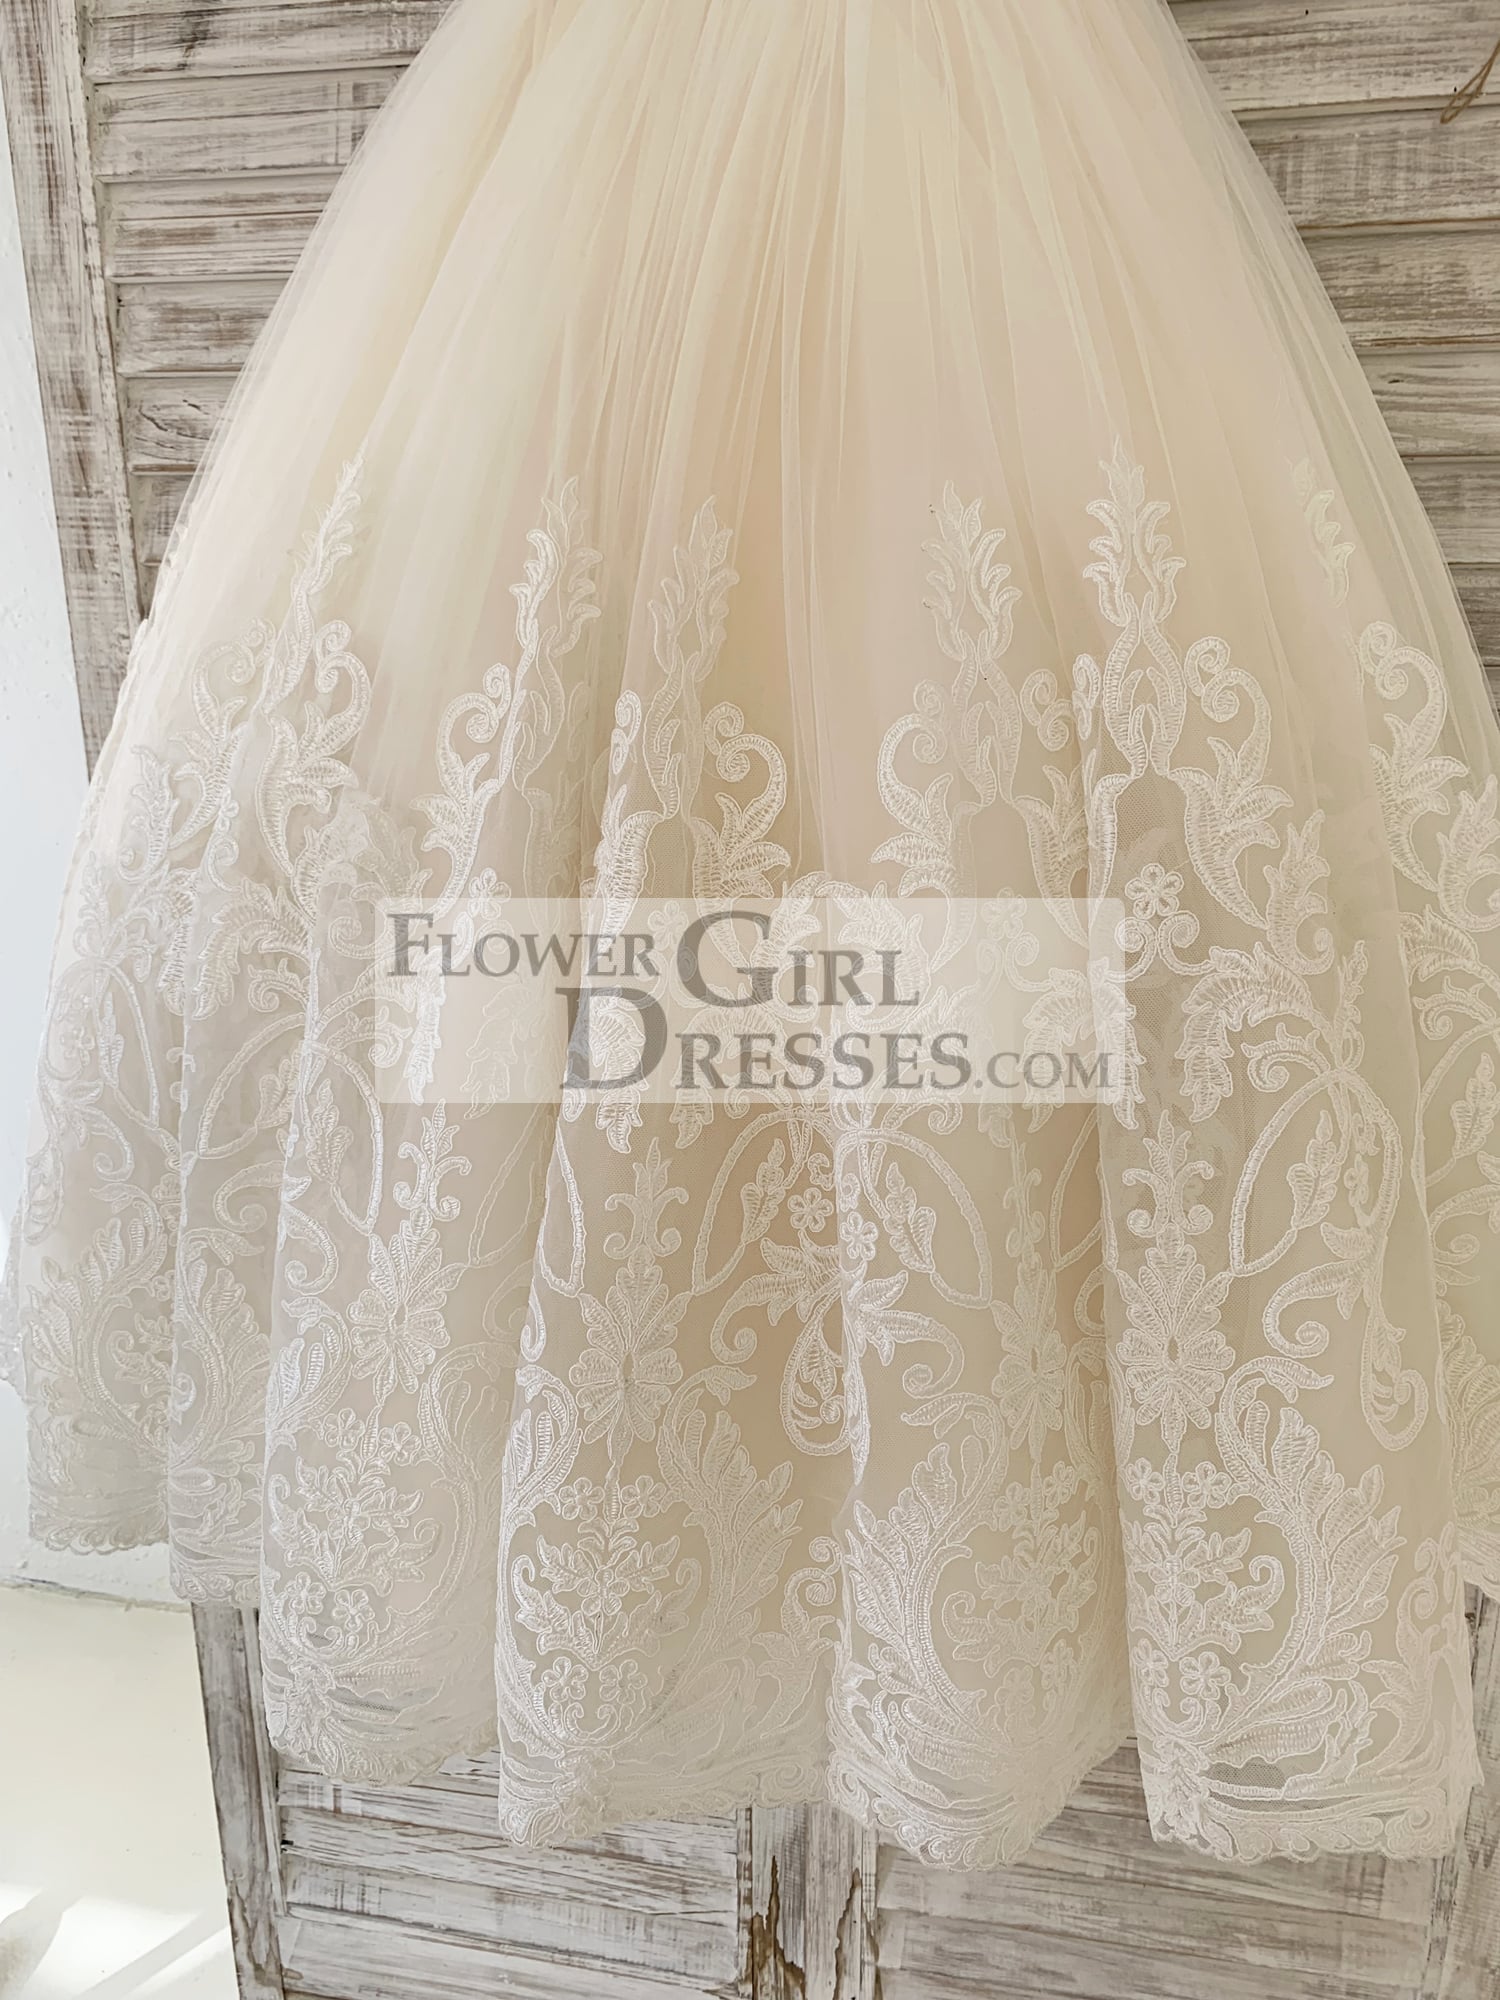 Cap Sleeves Lace Champagne Tulle Wedding Flower Girl Dress Kids Party Dress with Beaded Belt